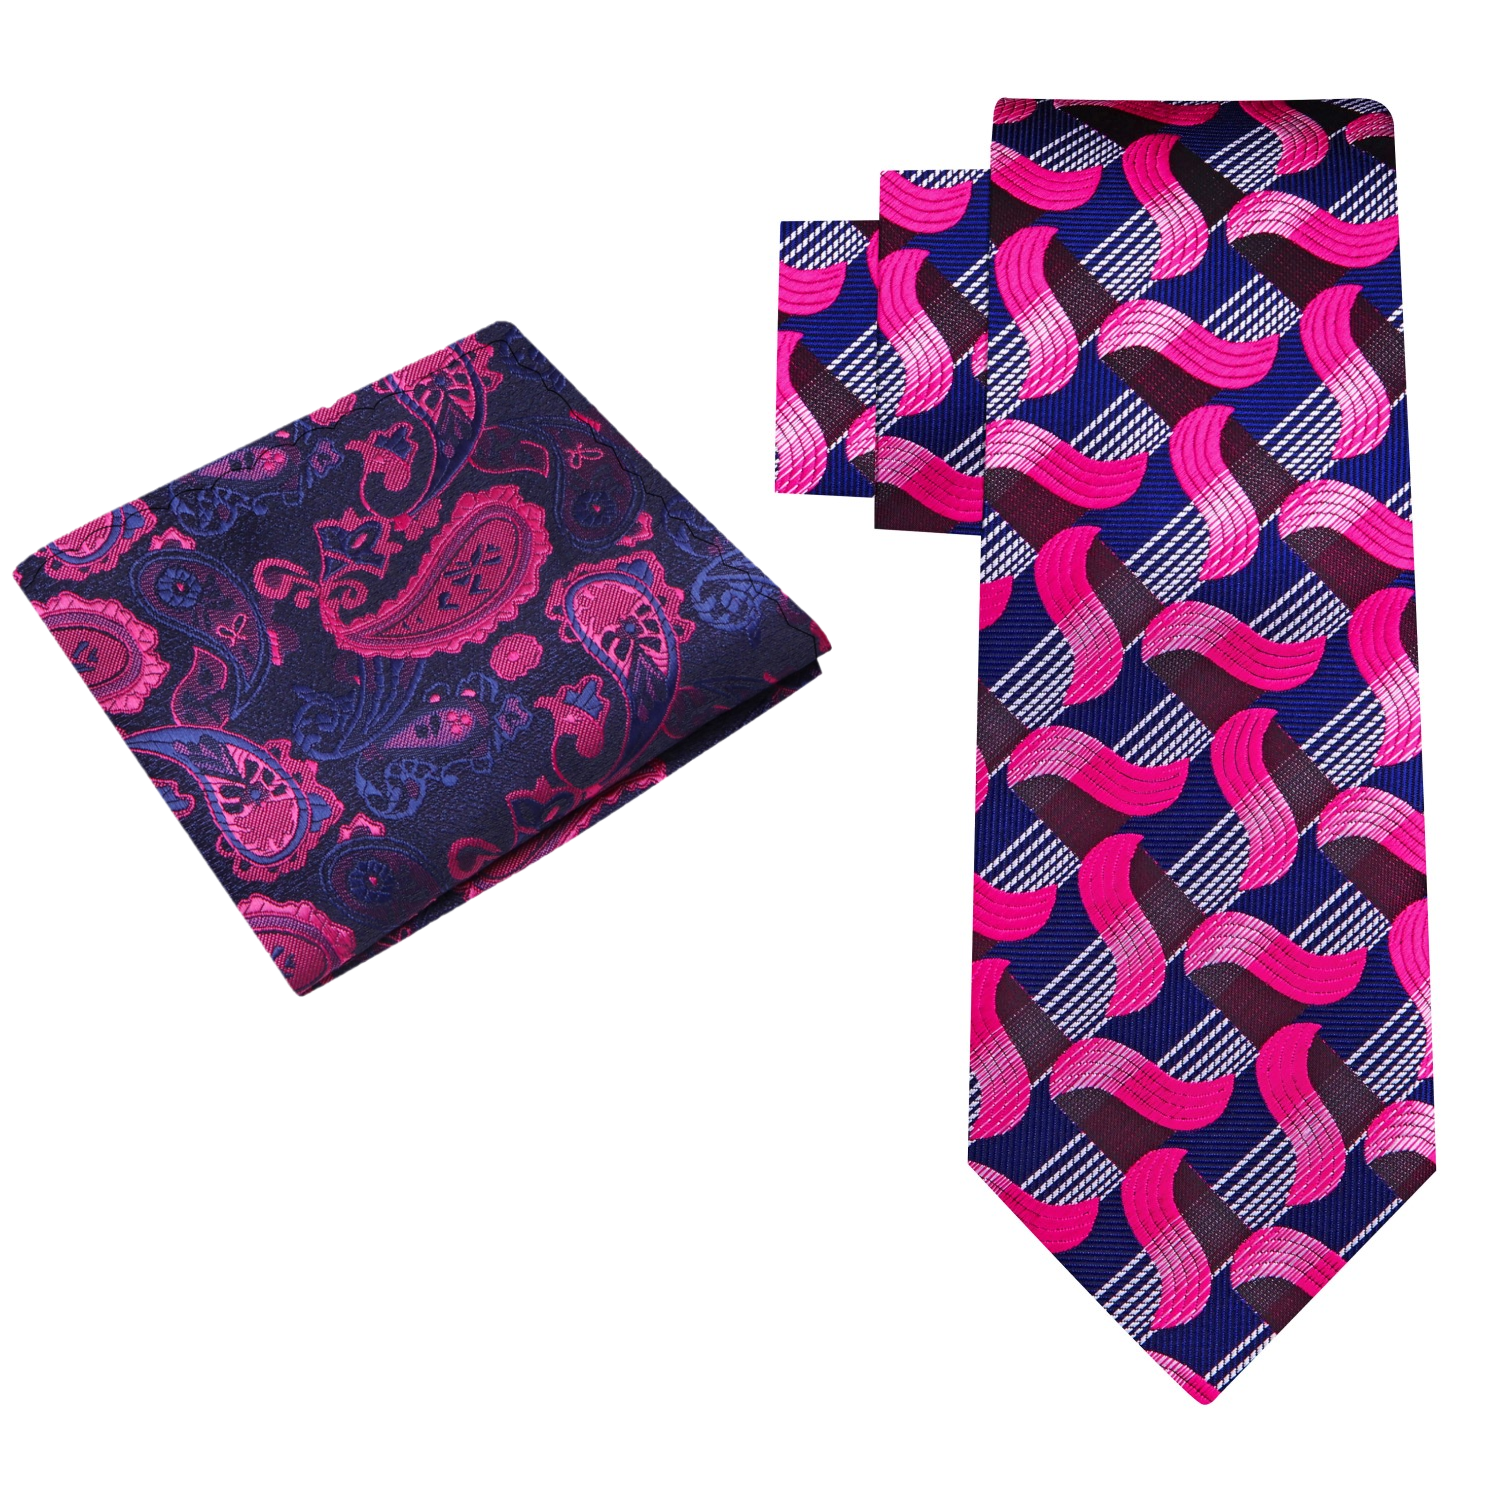 View 2: Pink, Blue abstract Waves Necktie and Accenting Square